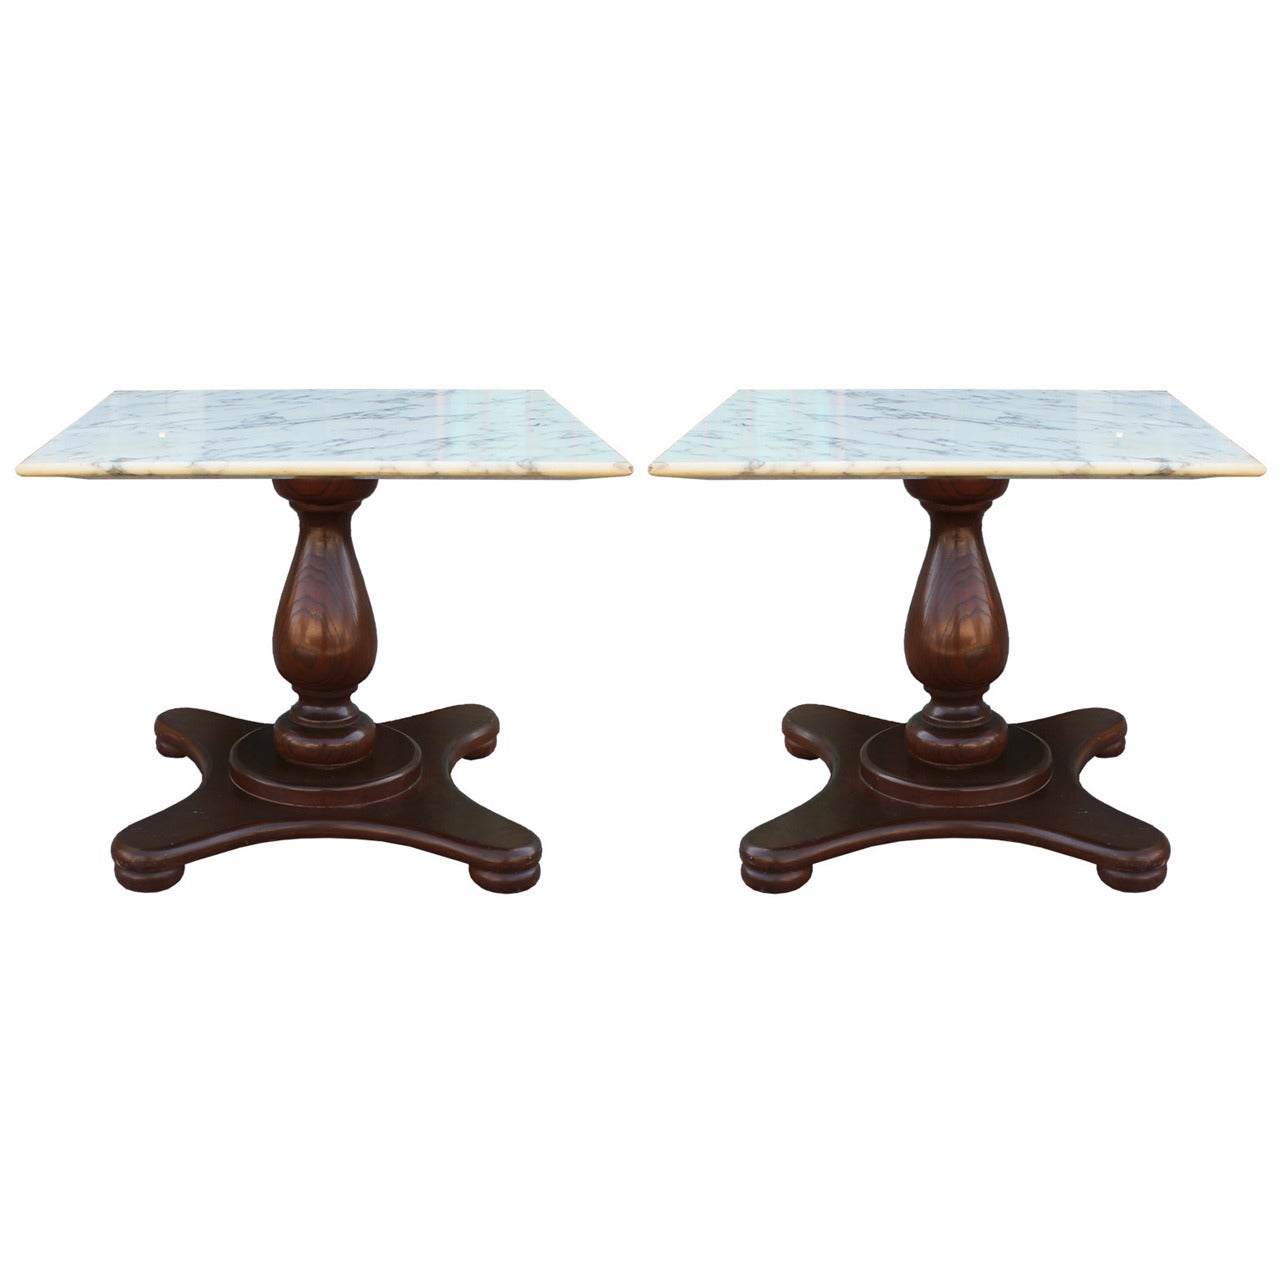 Pair of Stunning Marble Top Walnut End Tables